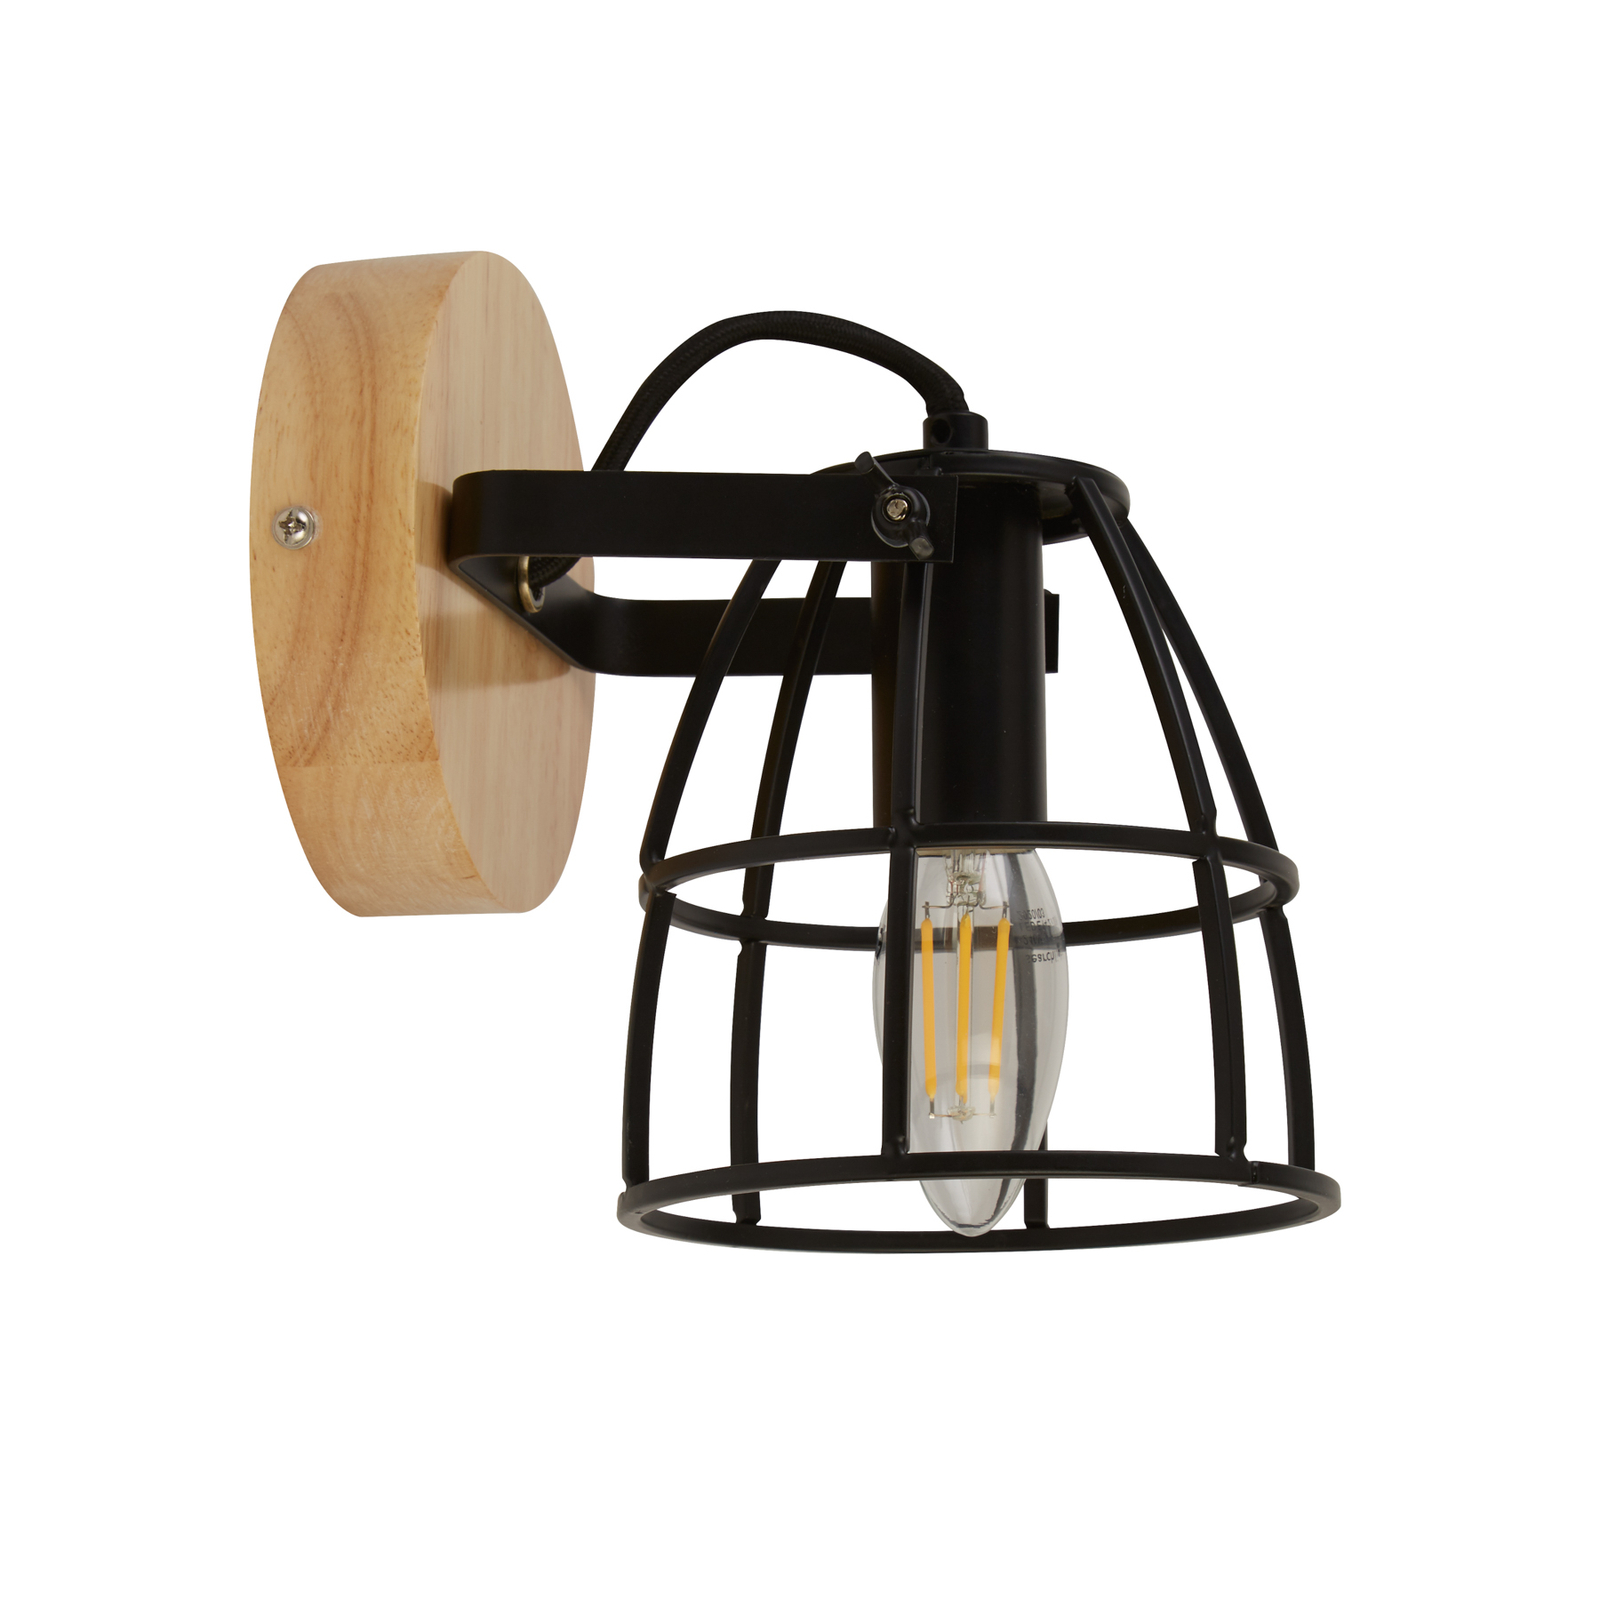 Cage II wall lamp with a grid-like lampshade